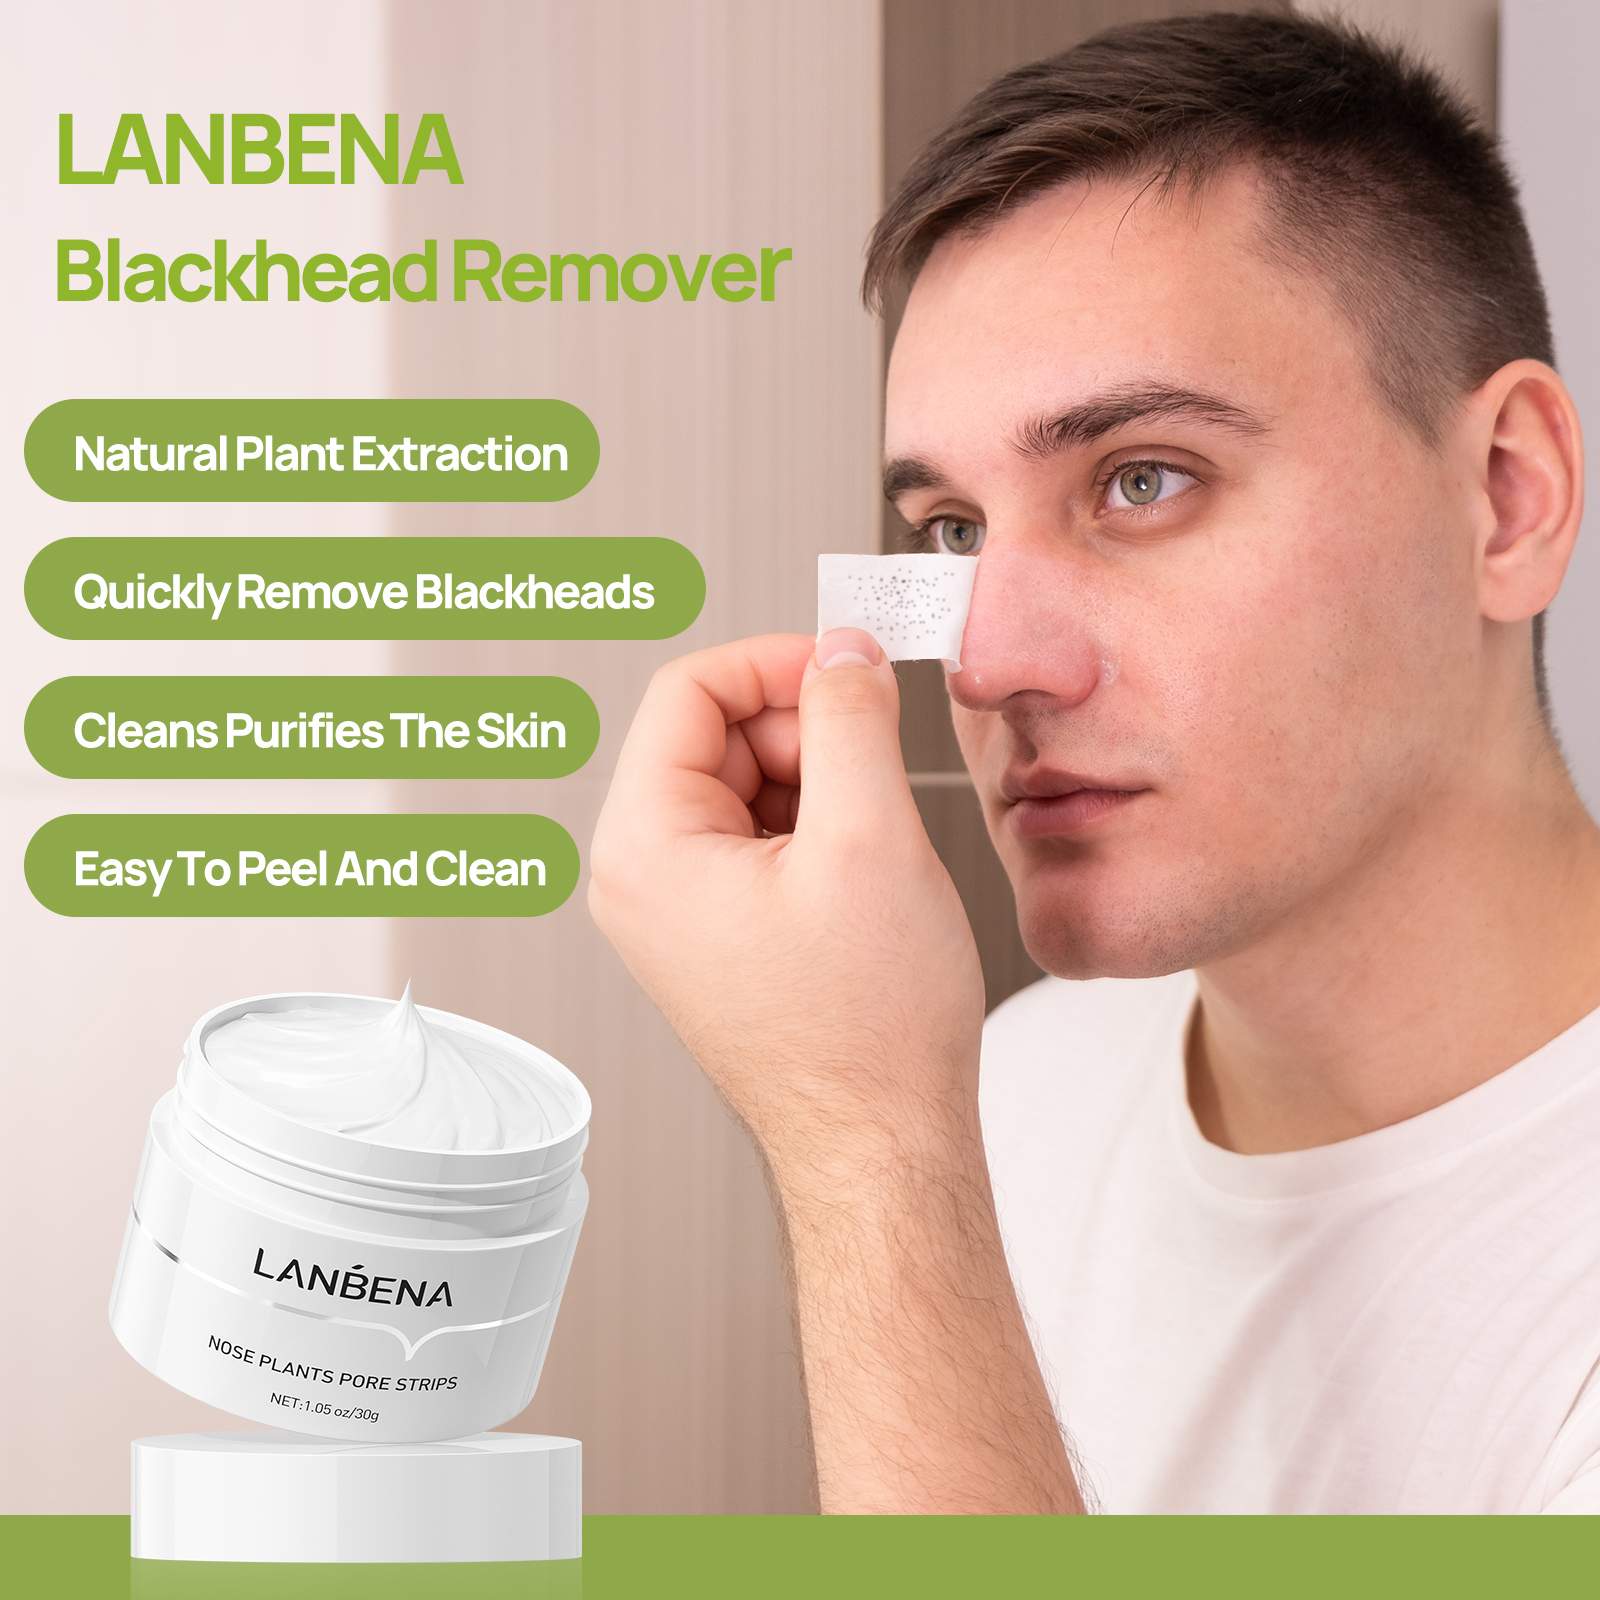 LANBENA Advanced Blackheads Remover Face Clean Pores Peel Off  Face Mask Nose Strips for Blackheads(30g/1.05 Ounce) - image 5 of 8